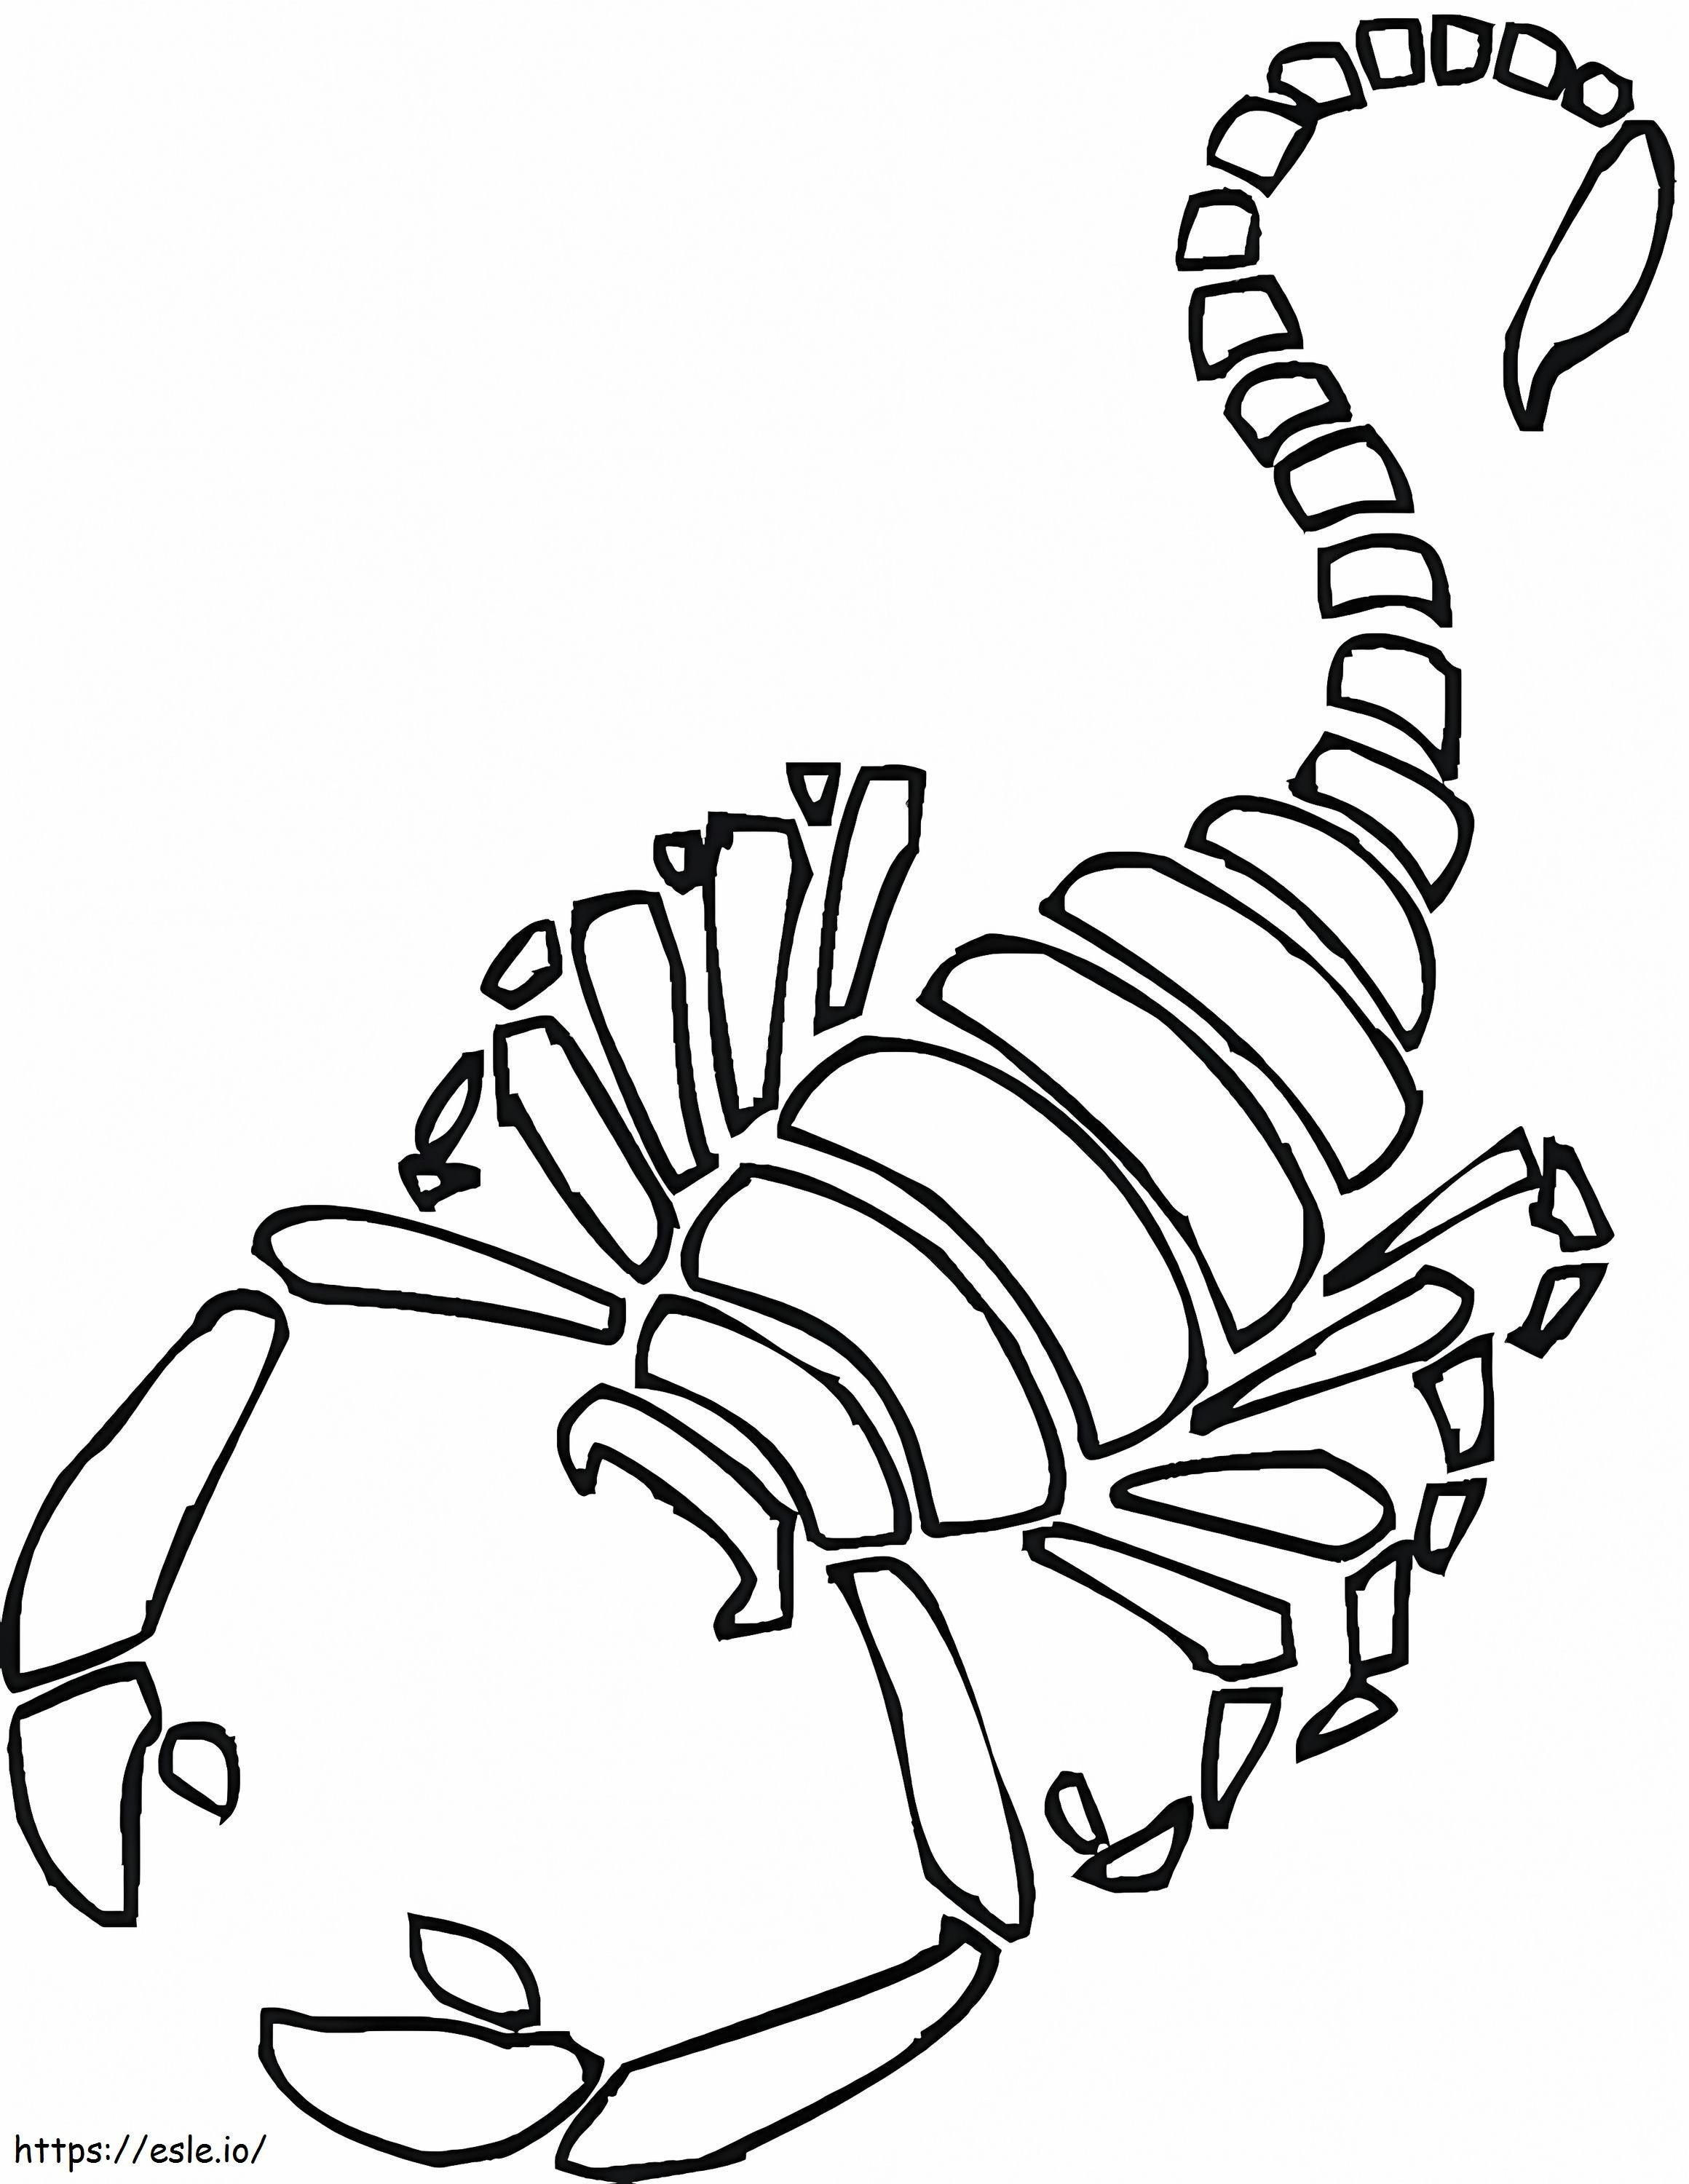 Scorpion 4 coloring page